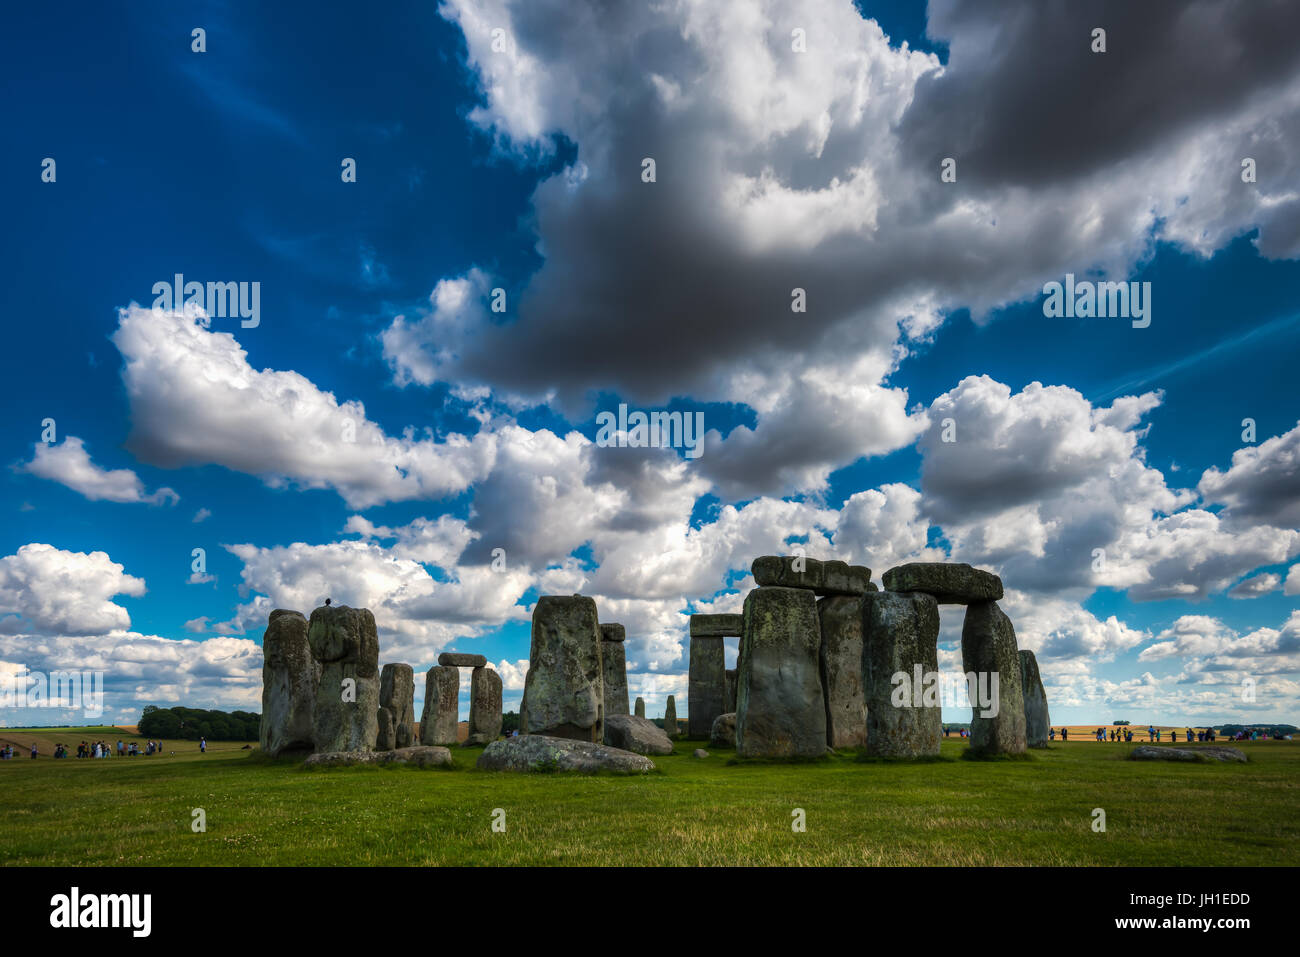 Stonehenge, Wiltshire, United Kingdom.The site and its surroundings were added to UNESCO's list of World Heritage Sites in 1986. Stock Photo